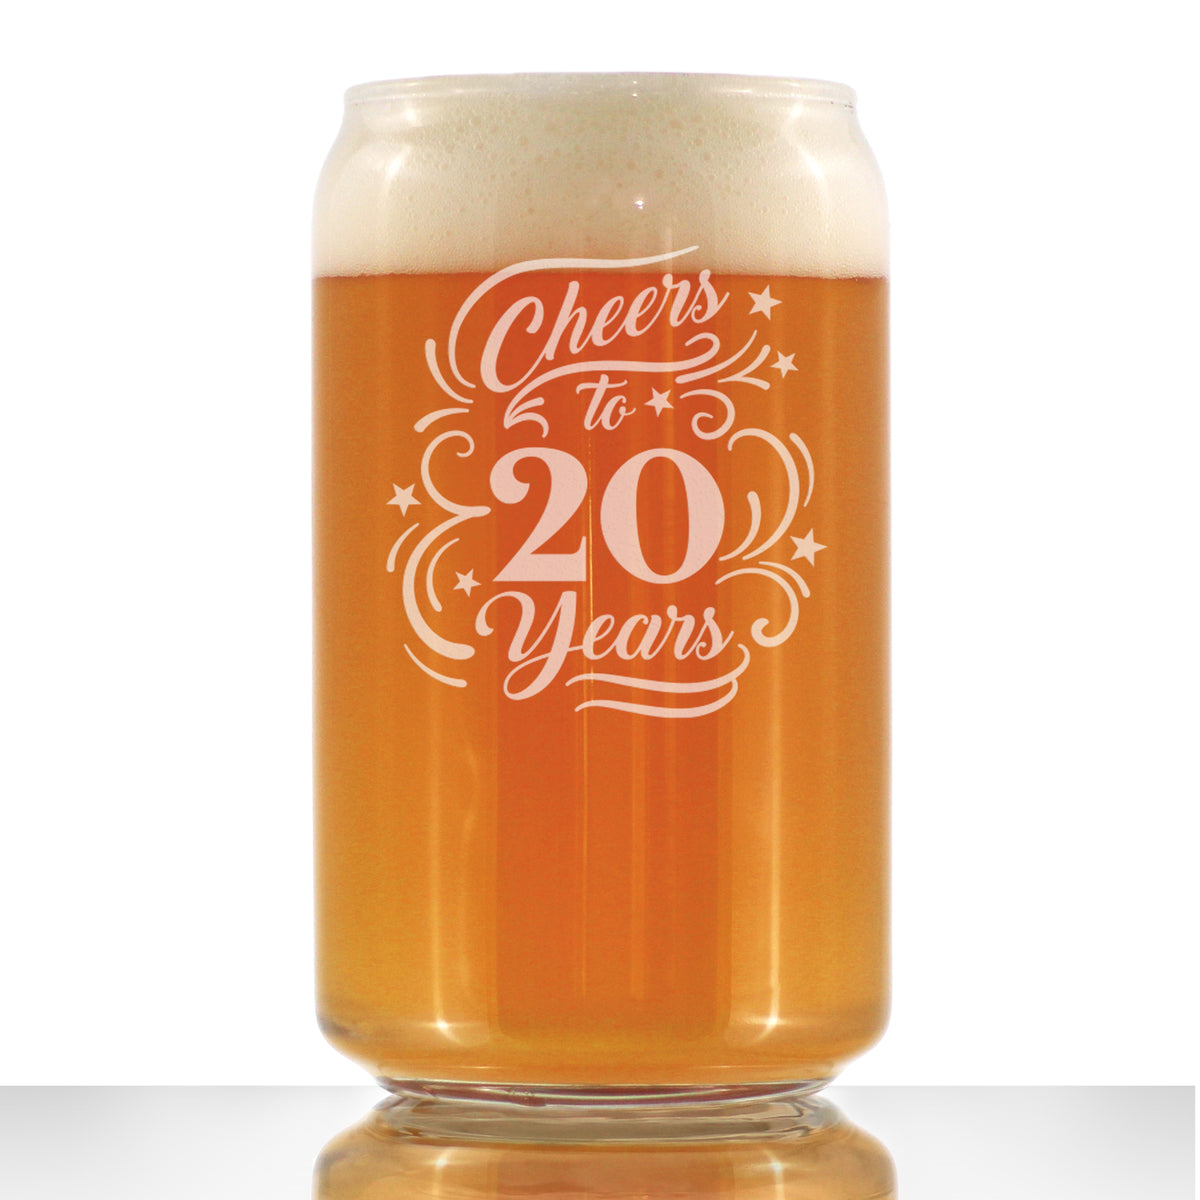 Cheers to 20 Years - Beer Can Pint Glass Gifts for Women &amp; Men - 20th Anniversary Party Decor - 16 Oz Glasses